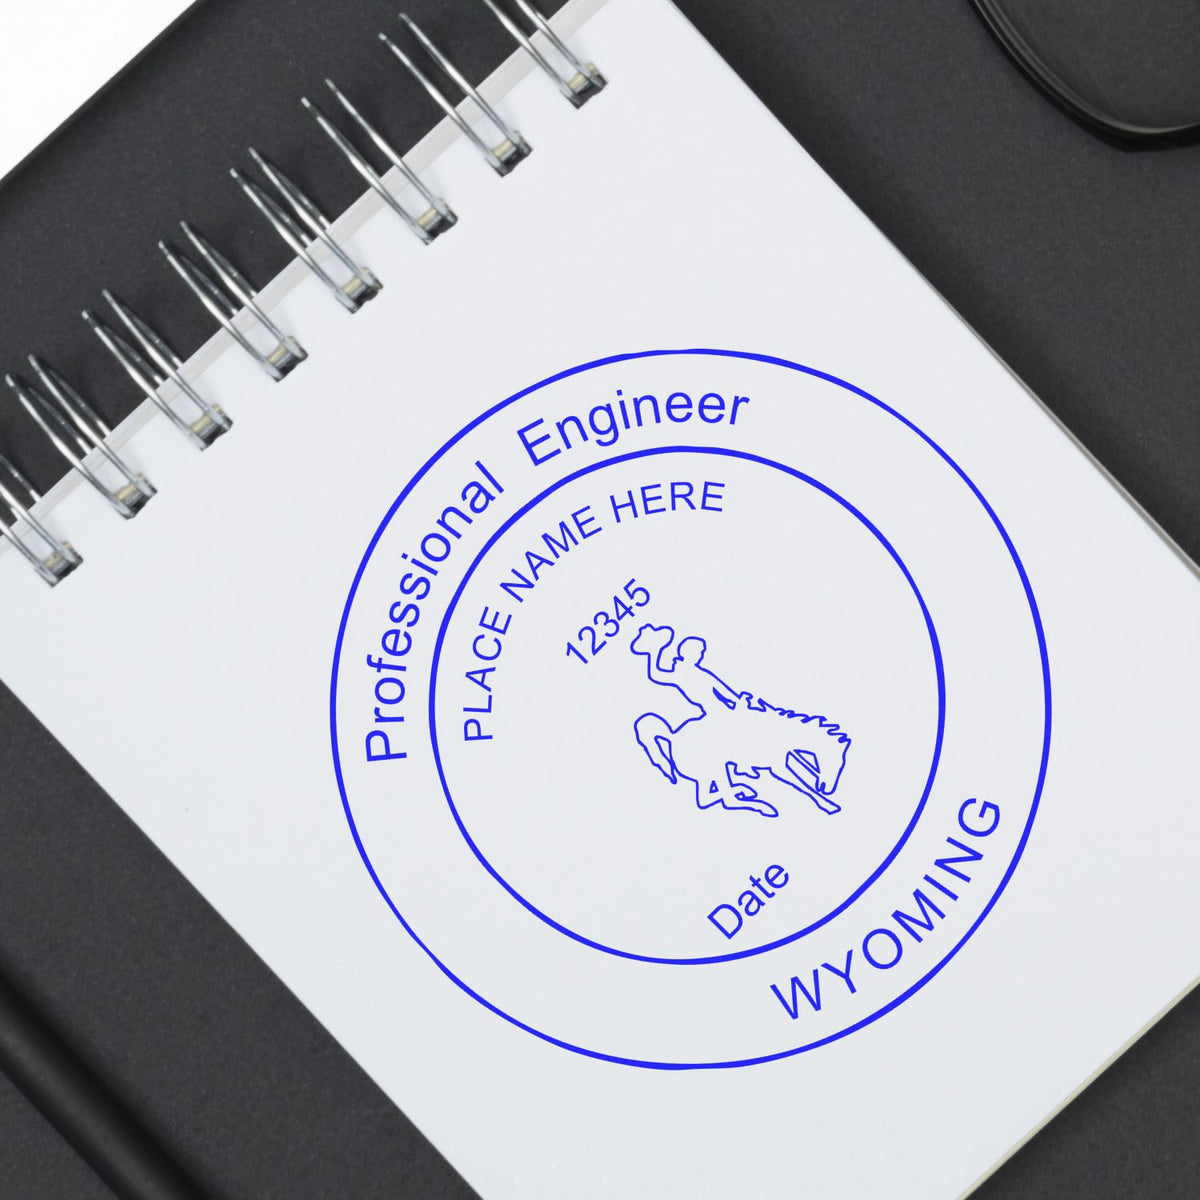 An alternative view of the Wyoming Professional Engineer Seal Stamp stamped on a sheet of paper showing the image in use